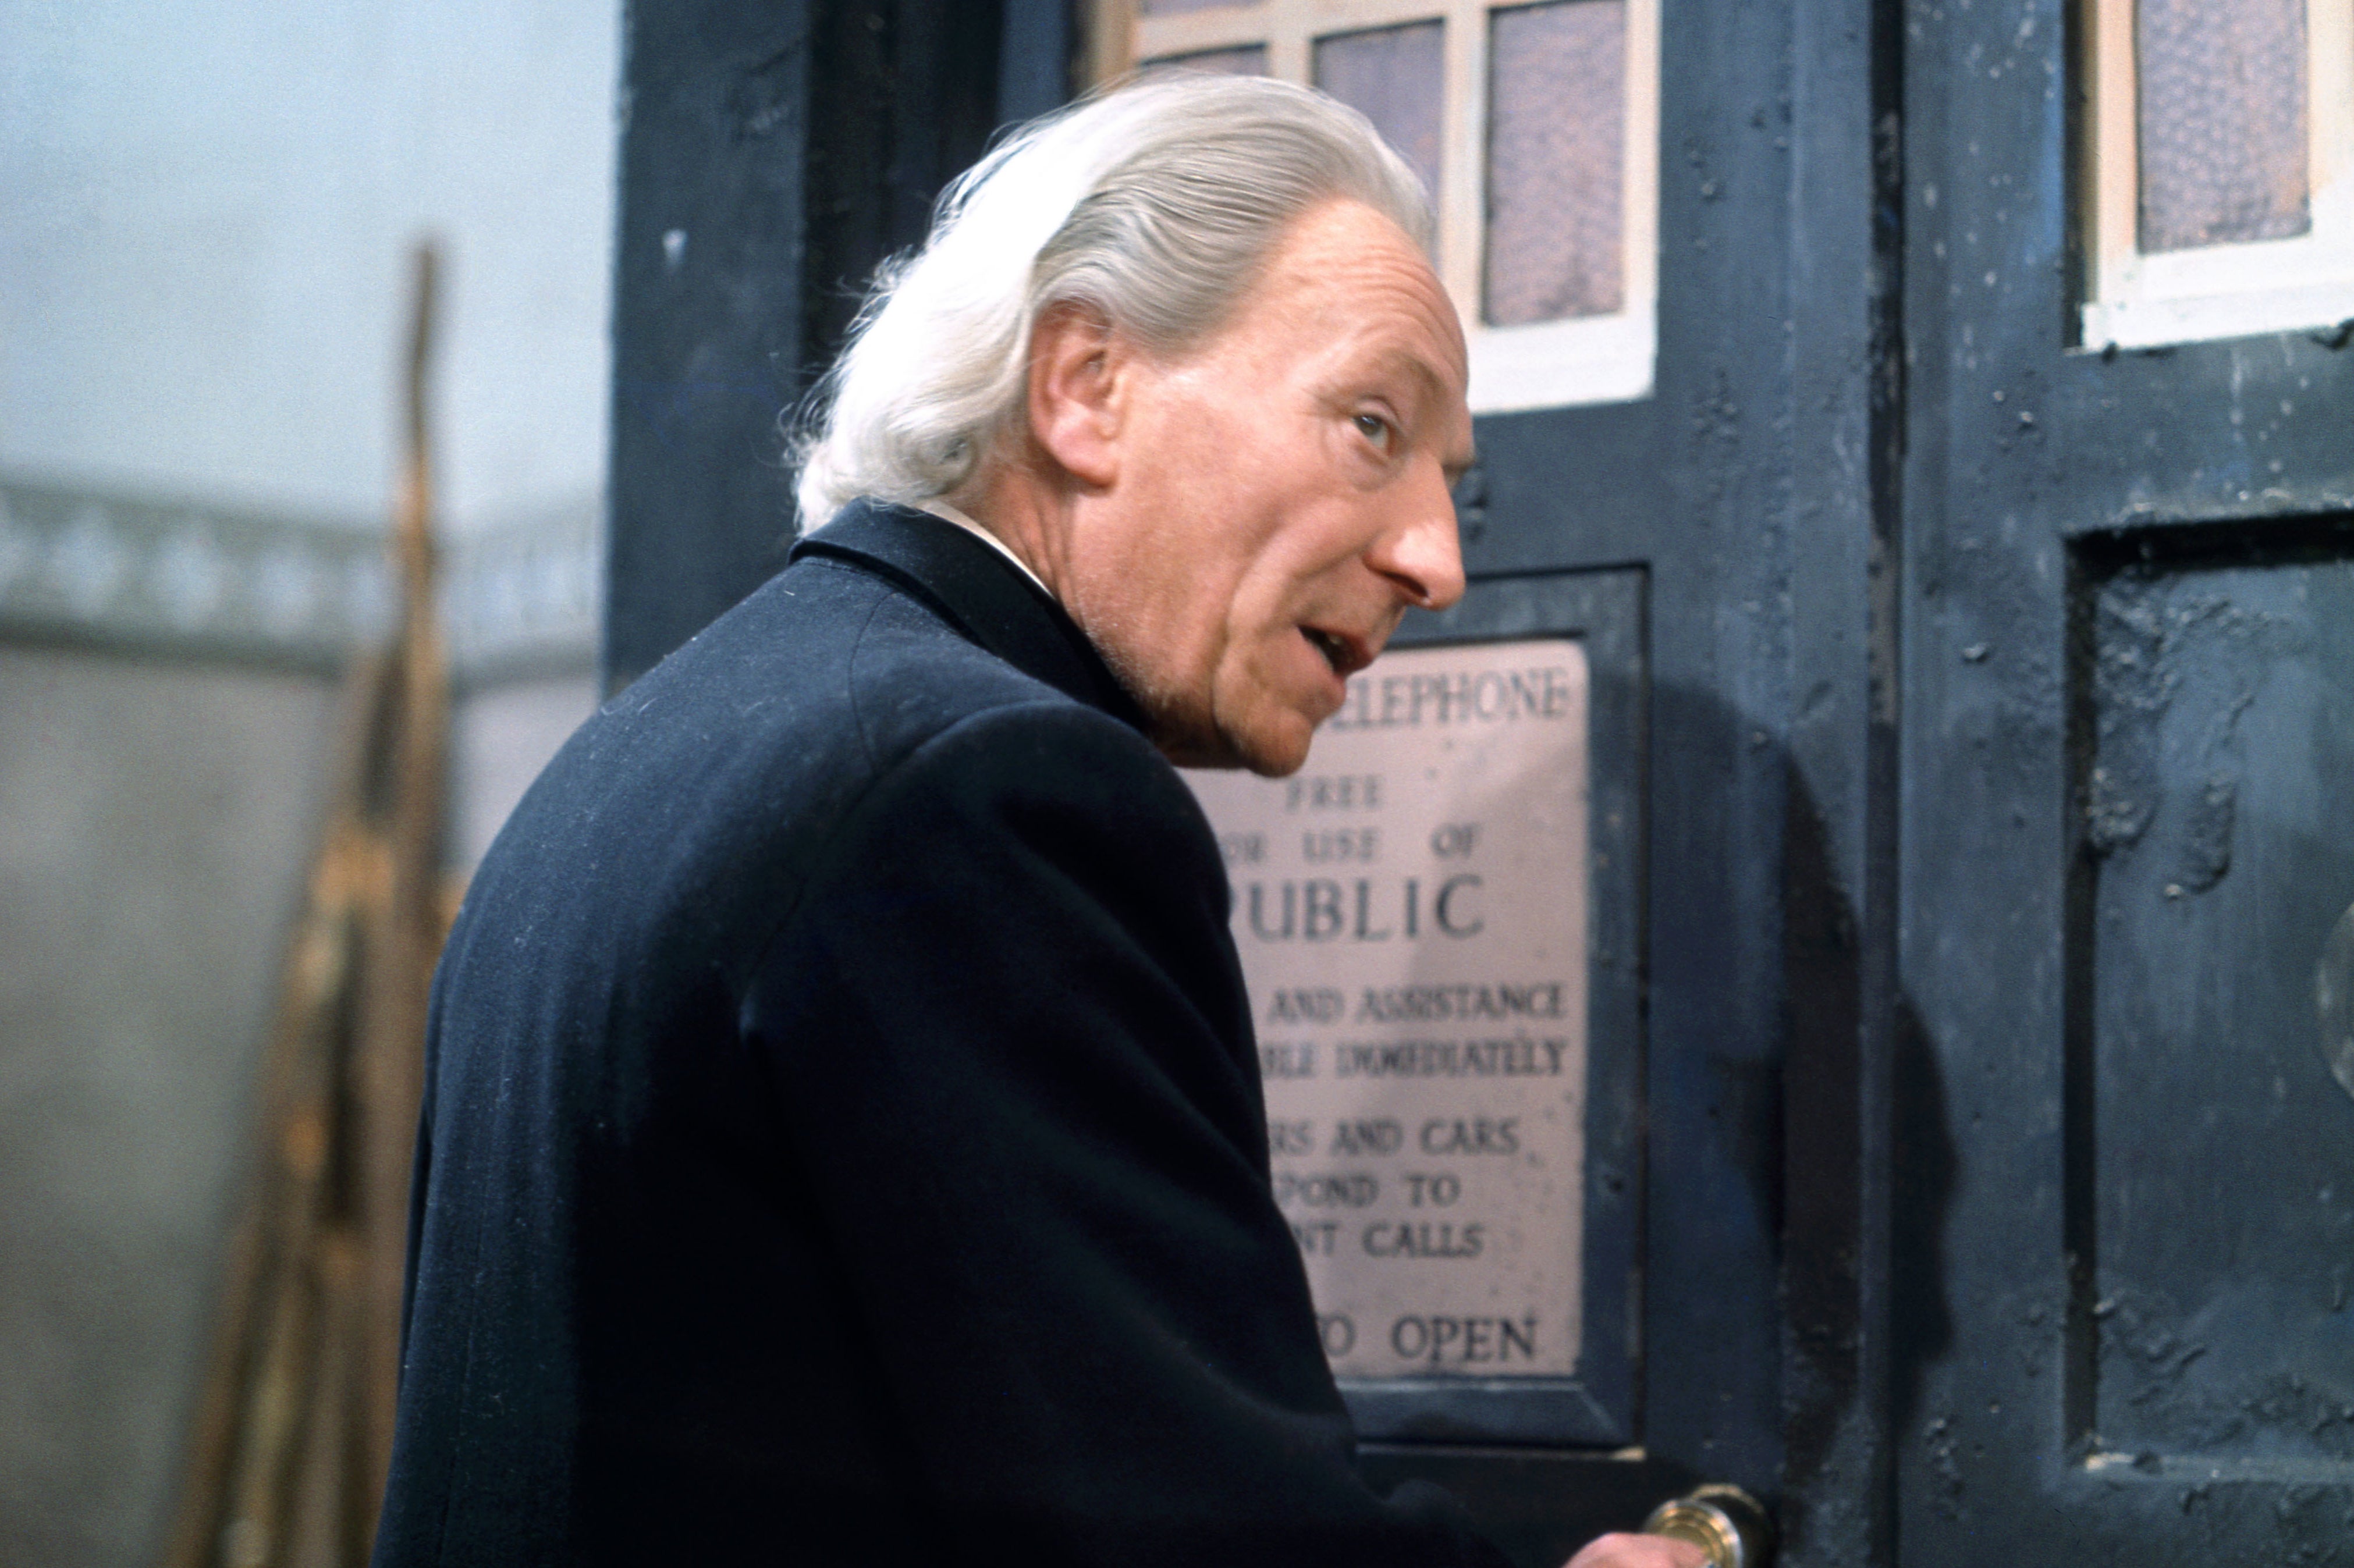 William Hartnell (pictured) was the first actor to play the Doctor in 1963.